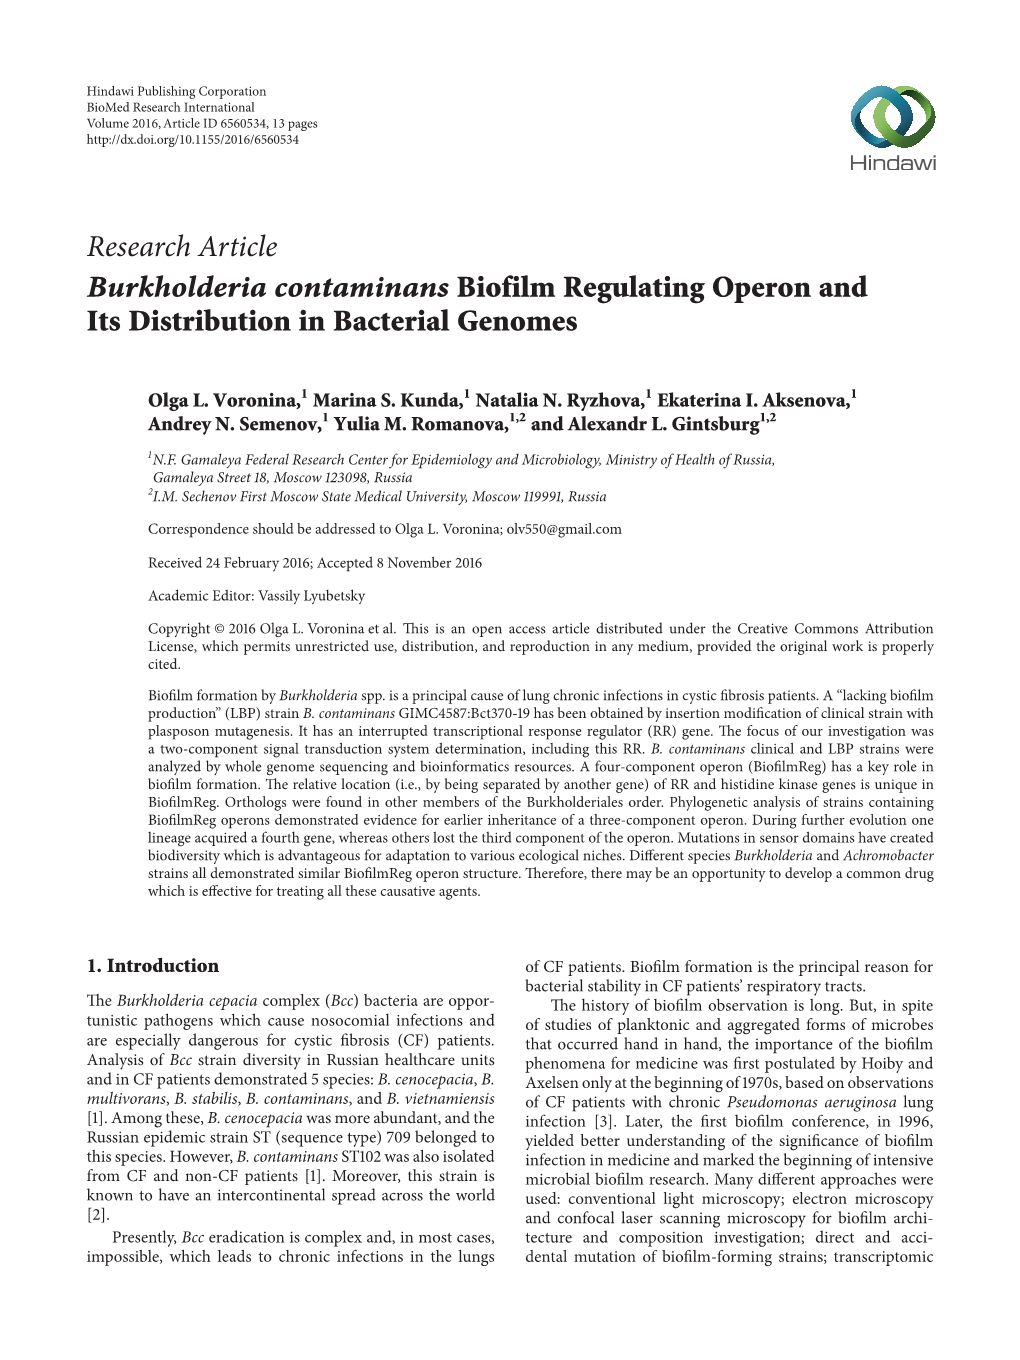 Research Article Burkholderia Contaminans Biofilm Regulating Operon and Its Distribution in Bacterial Genomes